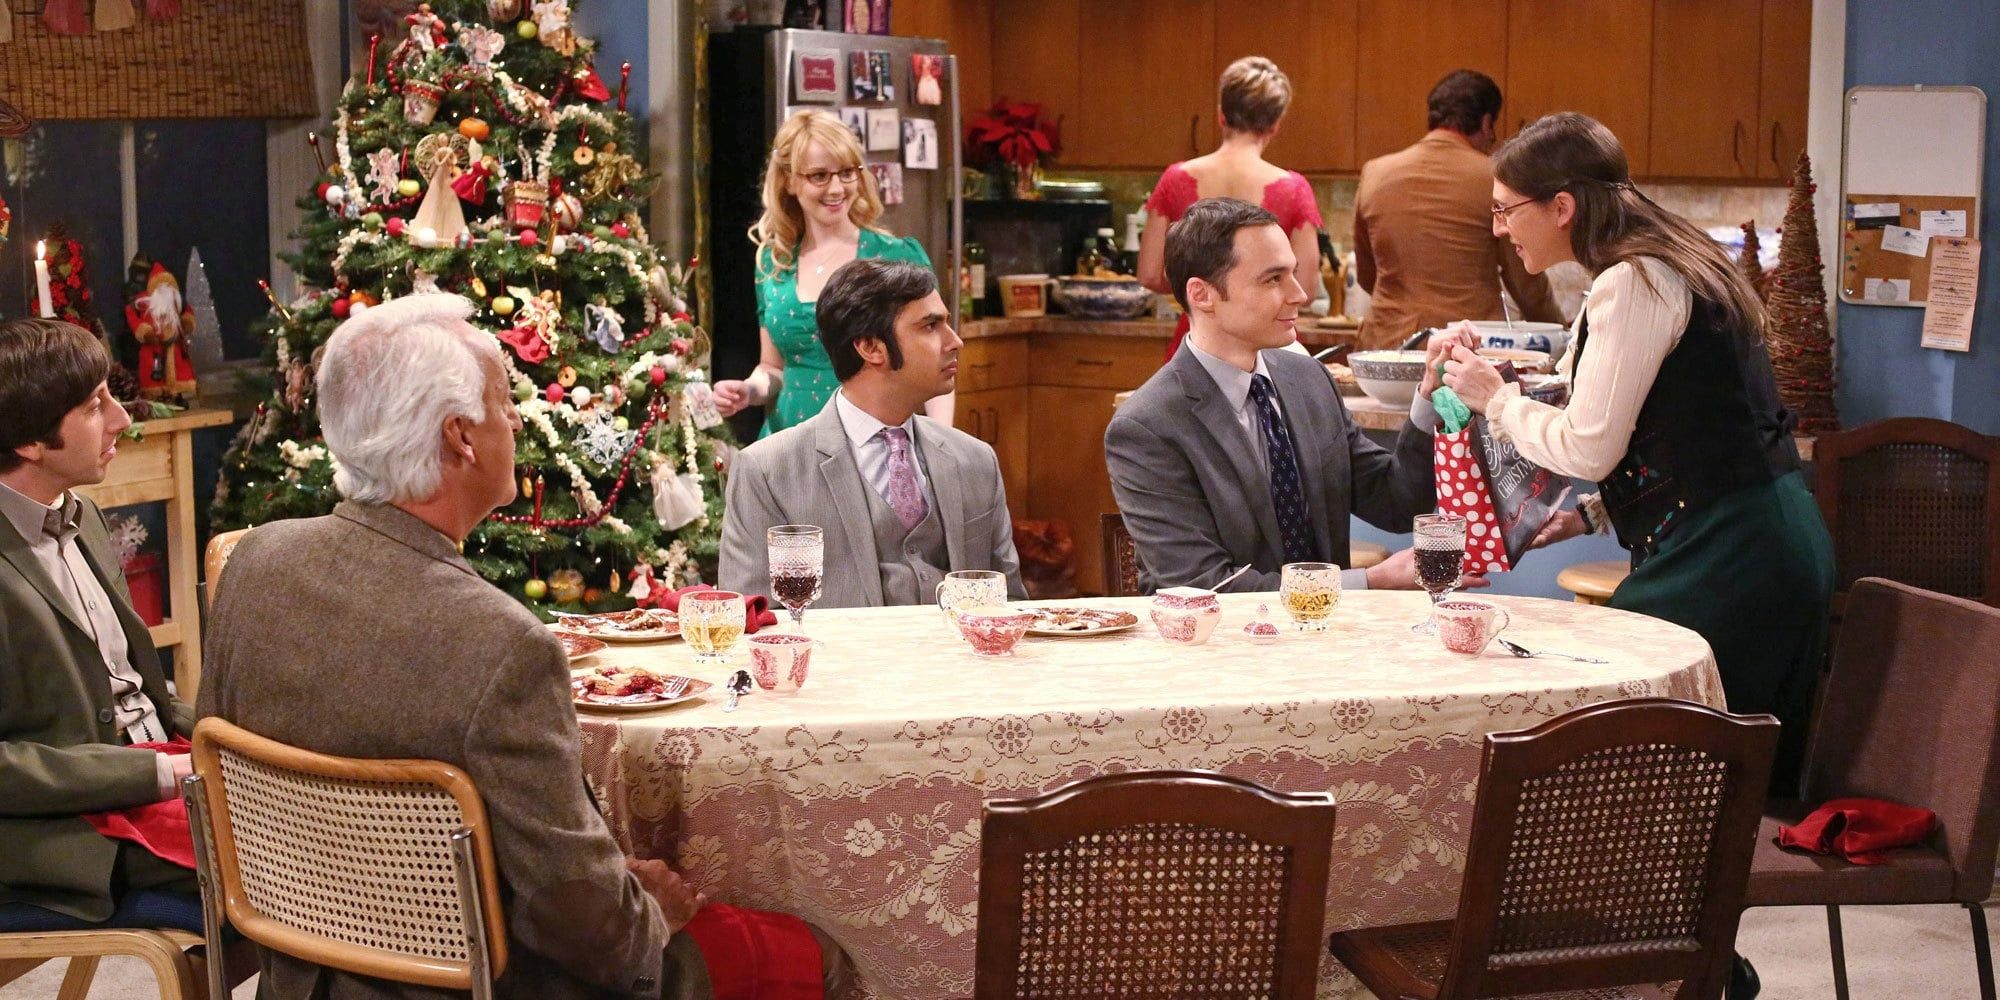 The cast of TBBT celebrating Christmas together at Amy's